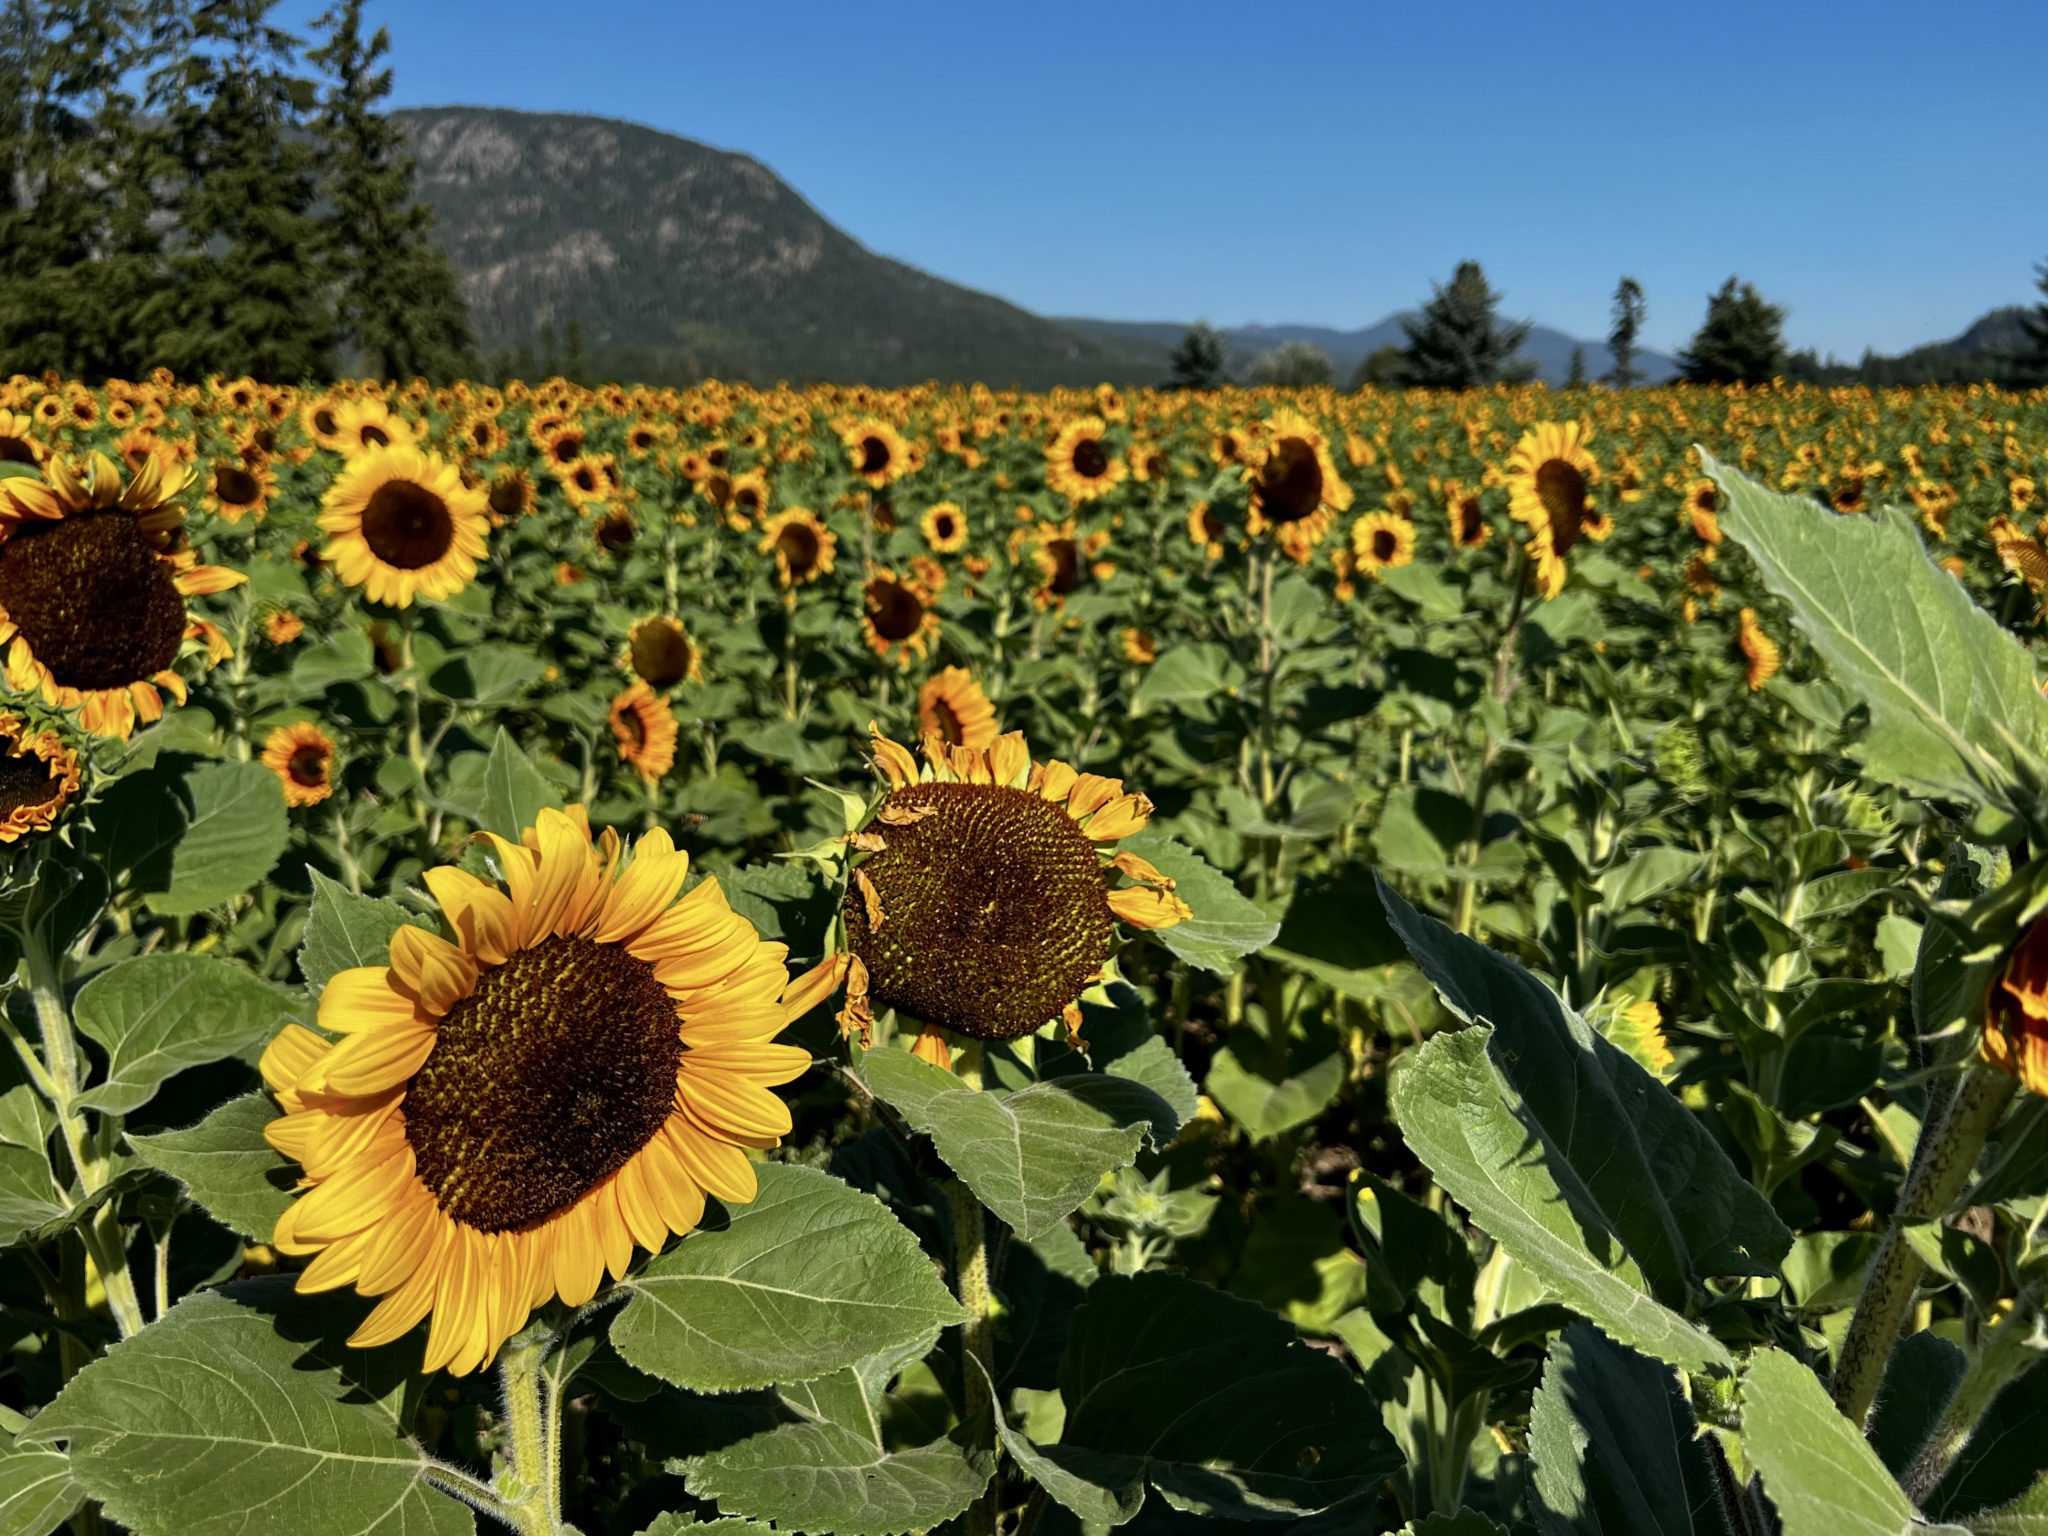 Field of Solana Number 12 sunflowers at a flower farm in August 2022 – photo by Mary Jane Duford